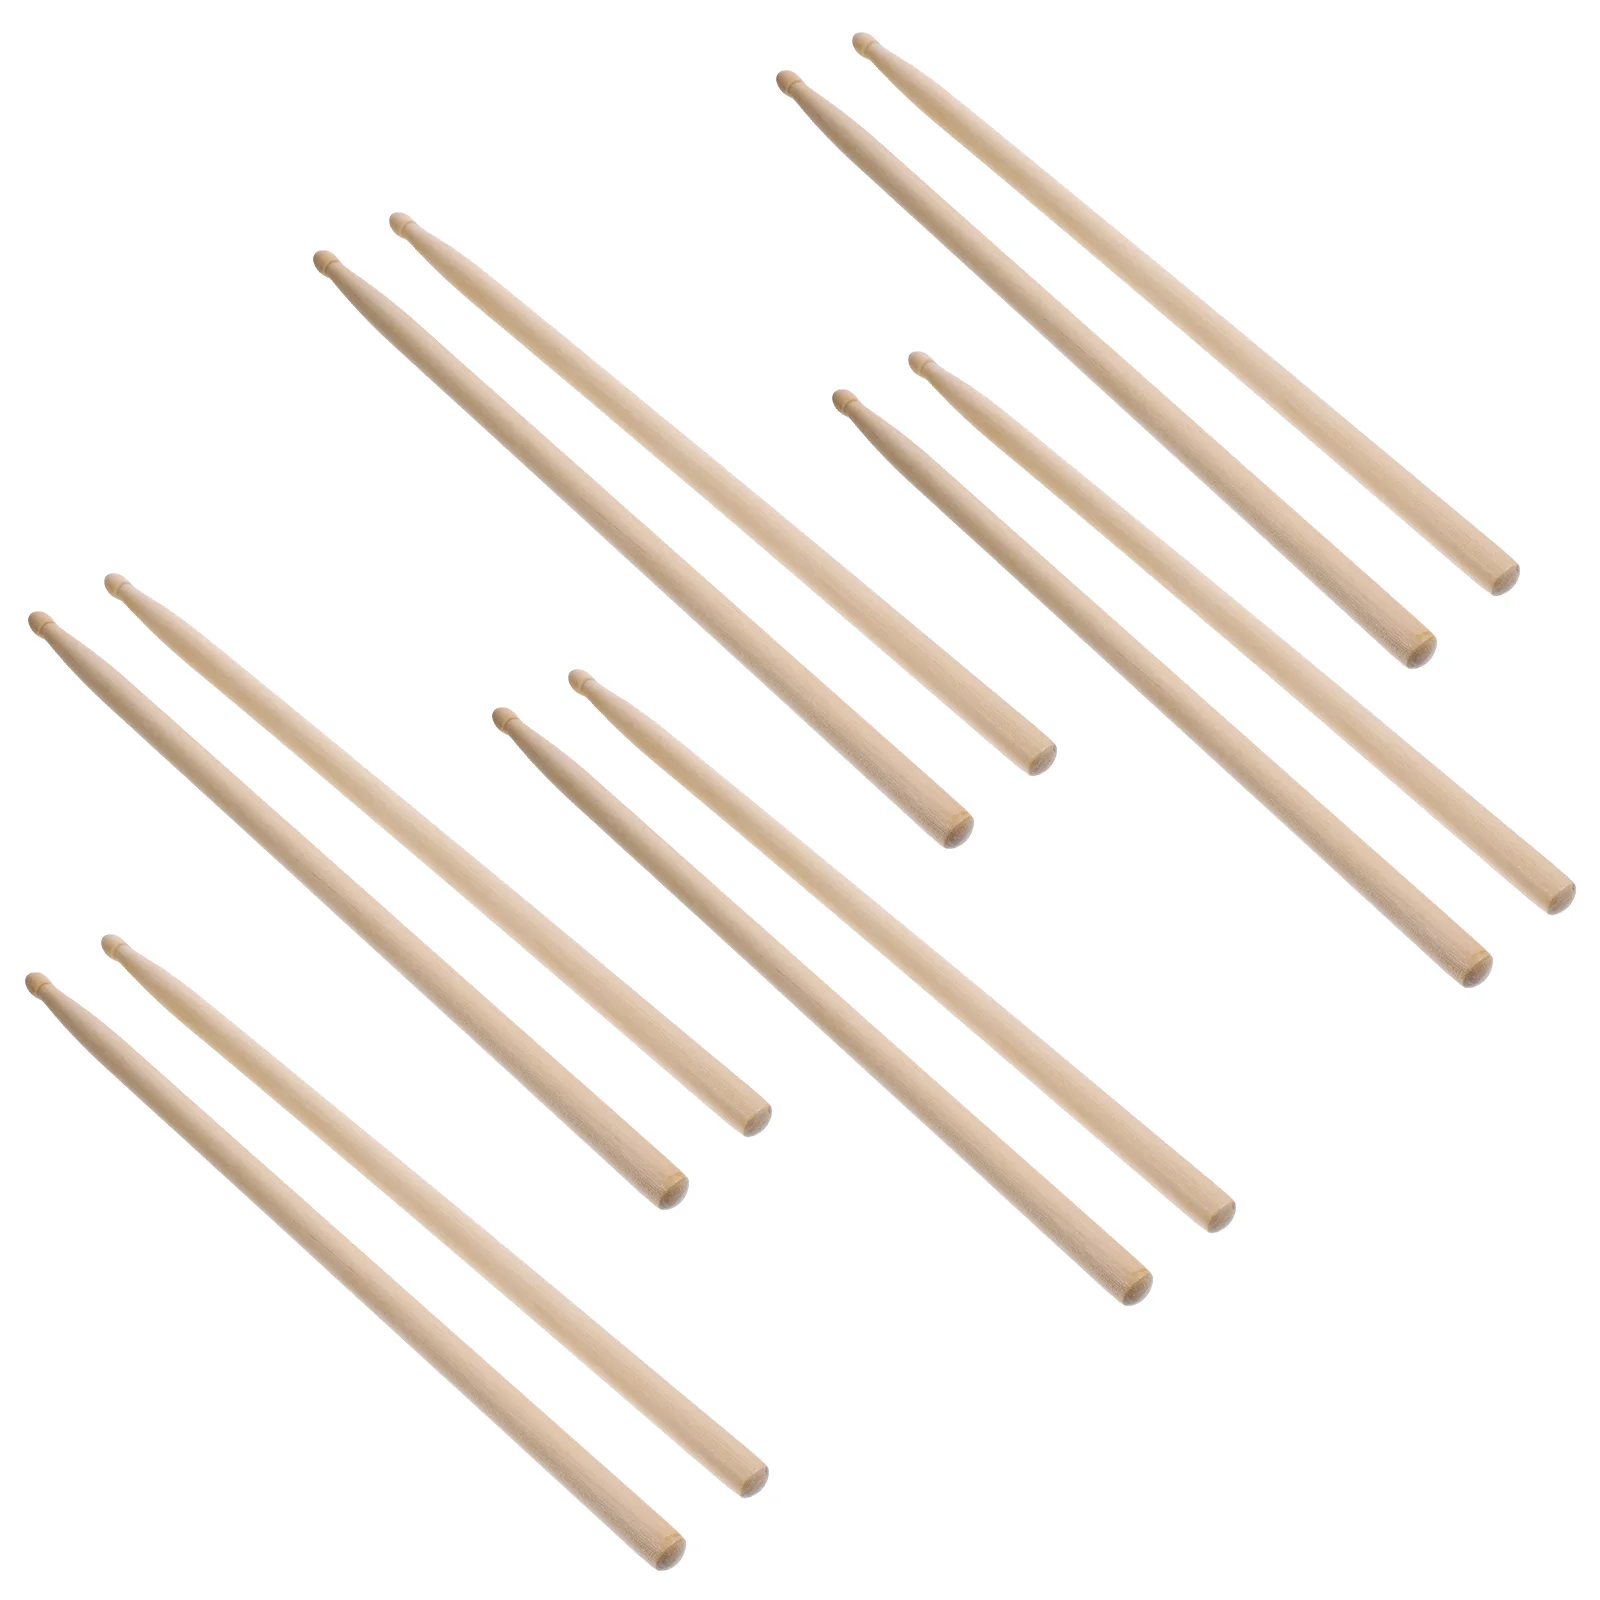 Instrument Mallets 5a Maple Wood Sticks Musical Instruments Drumsticks For Practice